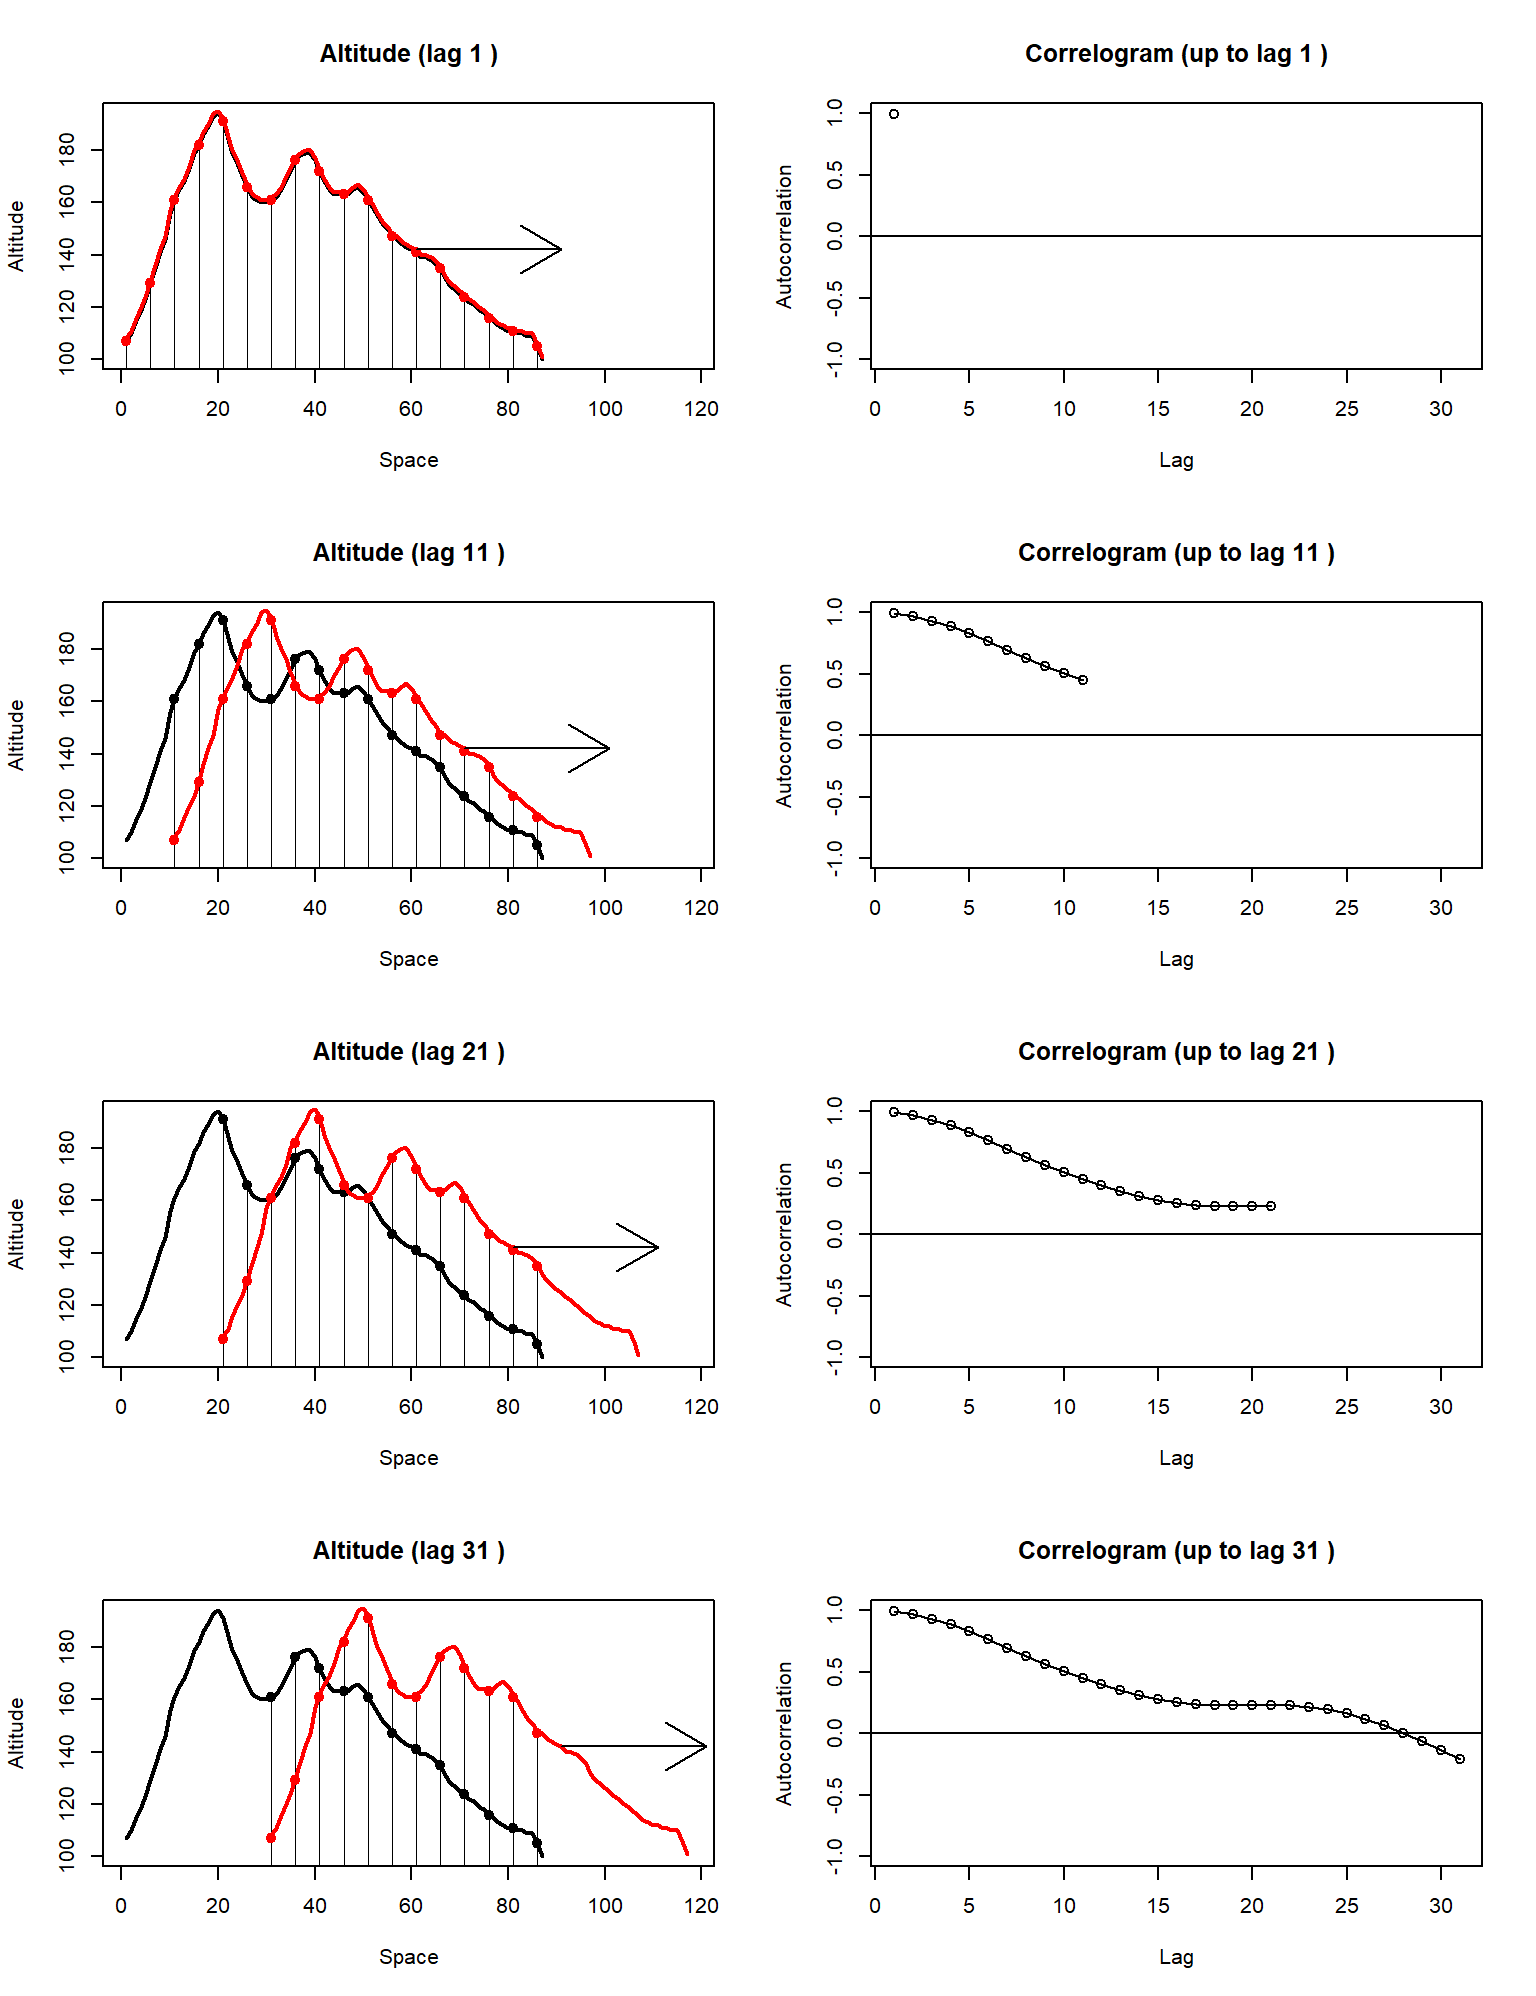 Shown on the left-hand panels are the correspondences between a curve (in black) and a copy of itself (in red), shifted at ever-increasing lags. Shown on the right-hand panels are the pairwise Pearson correlation coefficients calculated from each correspondence, at each lag.